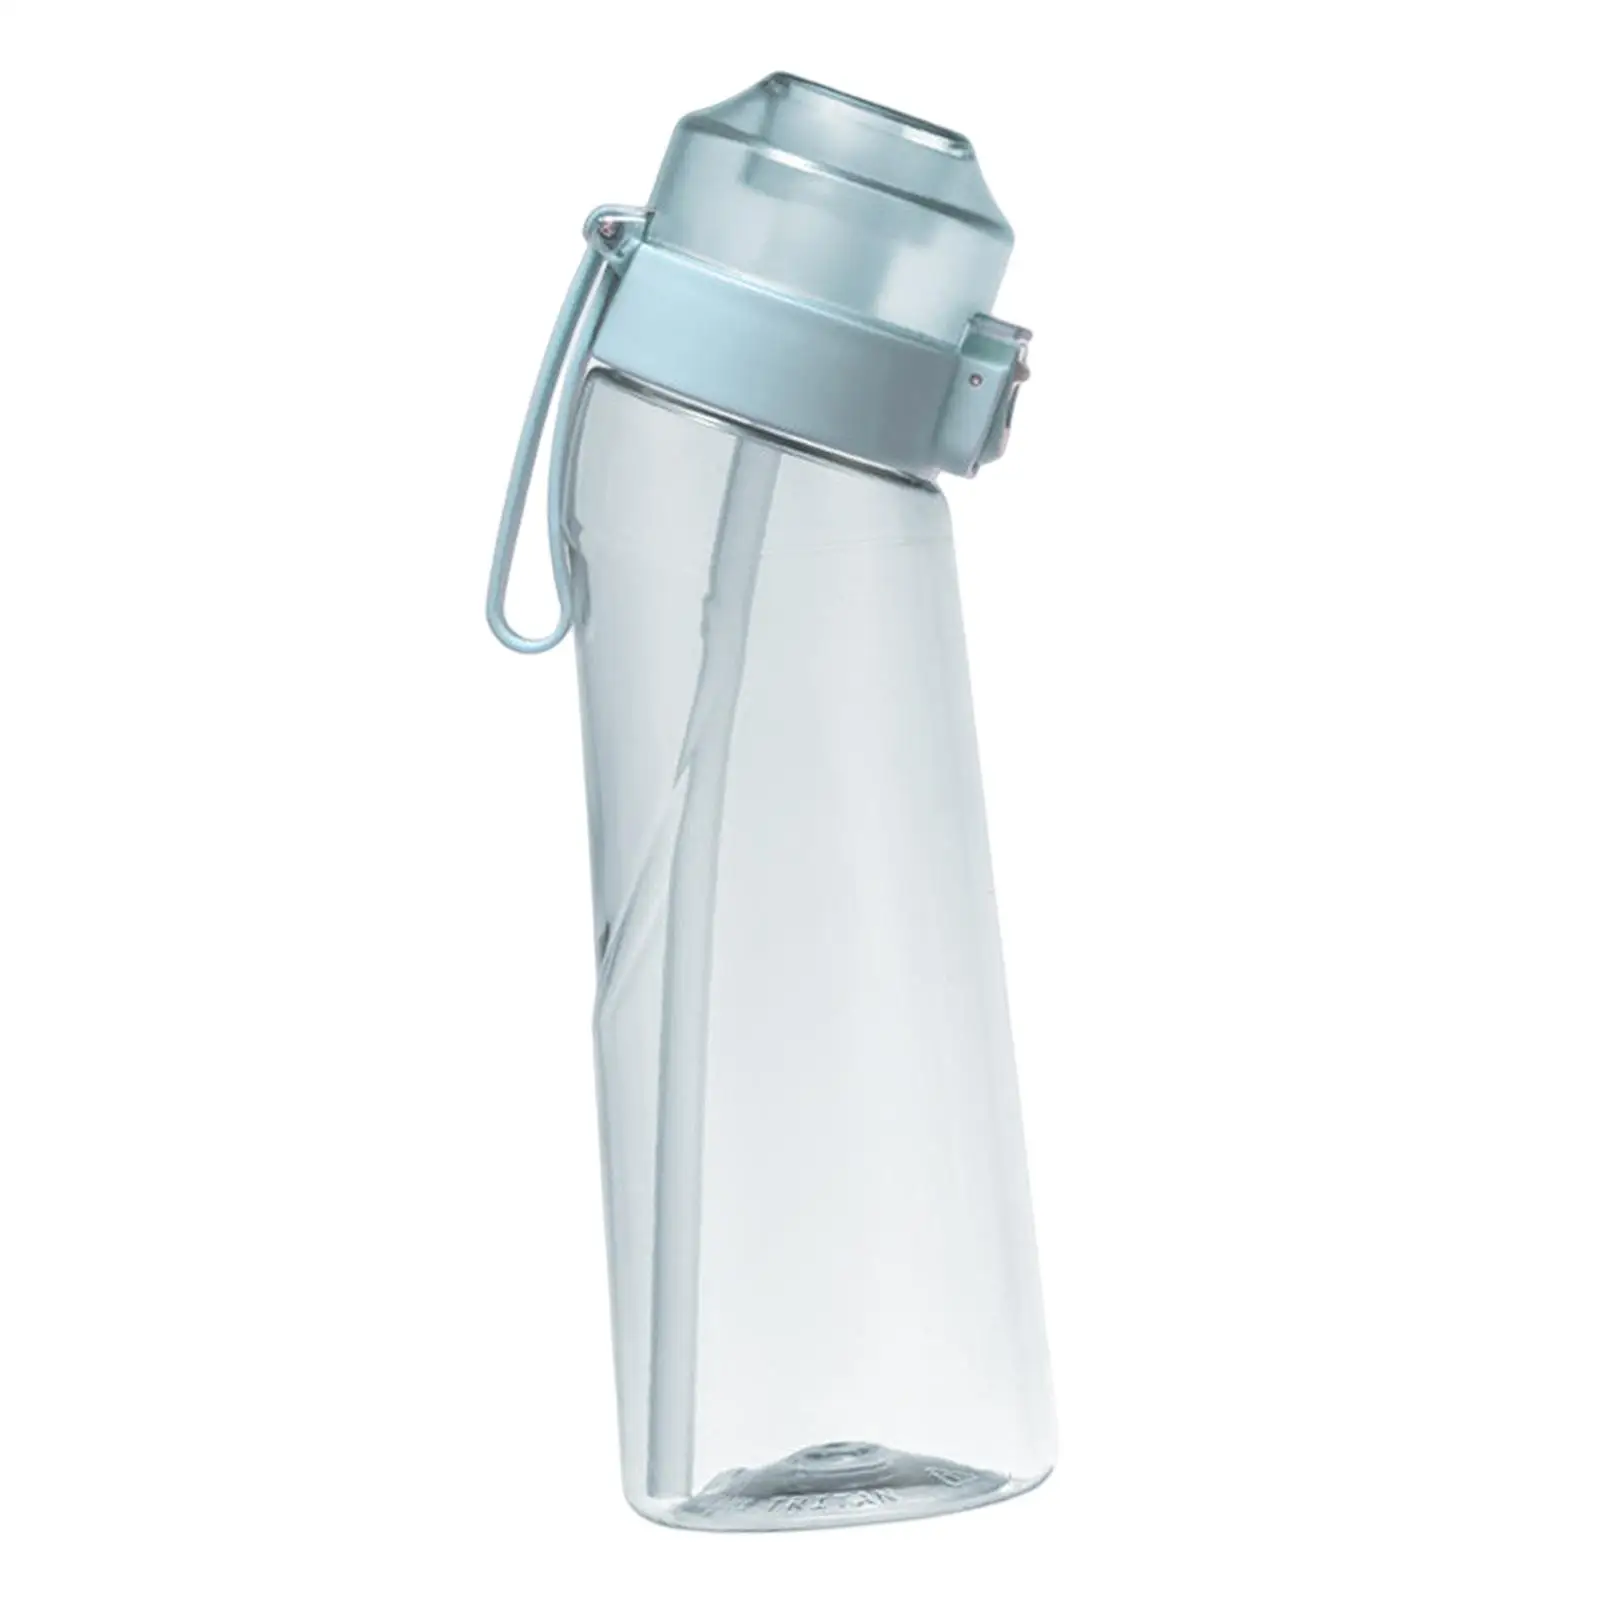 Portable Water Bottles, Sports Drinking Bottles, Ensure Drink Enough Water Throughout The Day for Workout